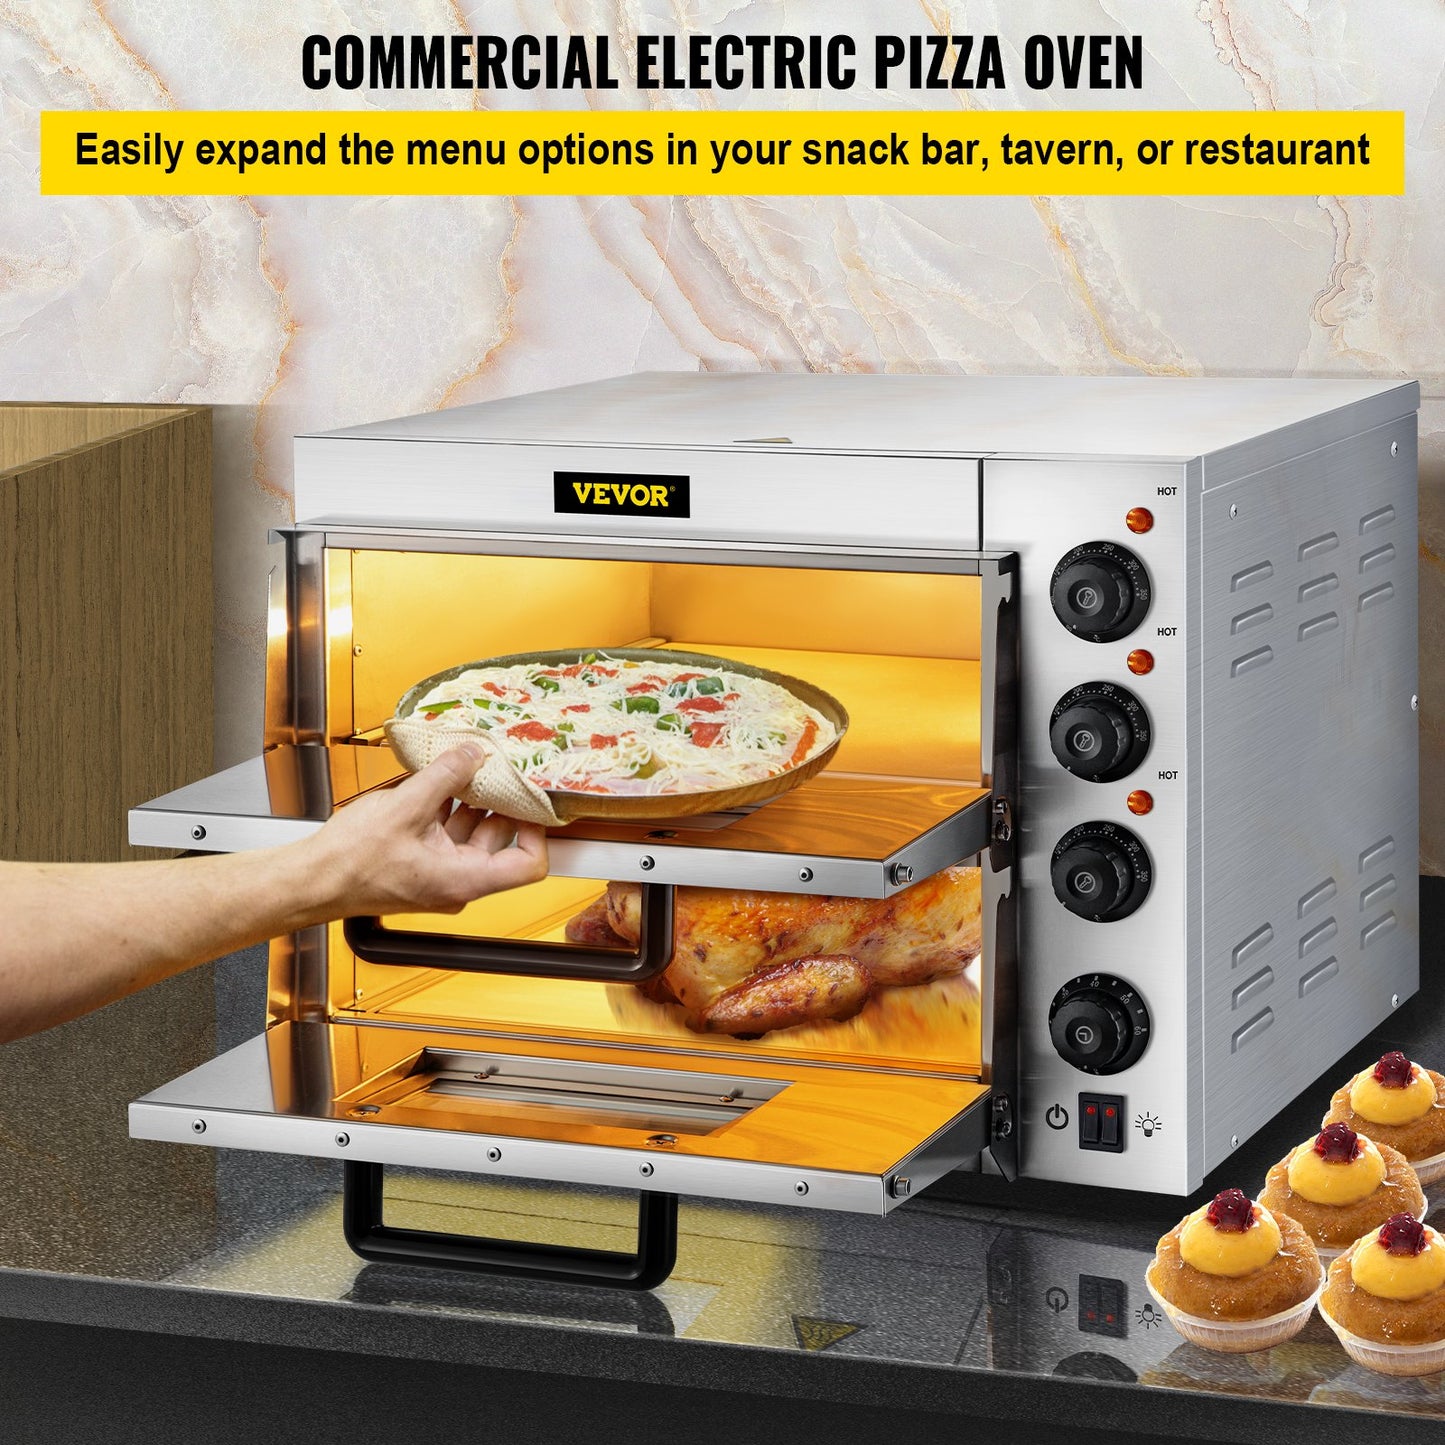 VEVOR 14" Commercial Pizza Oven Countertop 110V 1950W Electric Pizza Oven with Stone and Shelf - ZH-3M